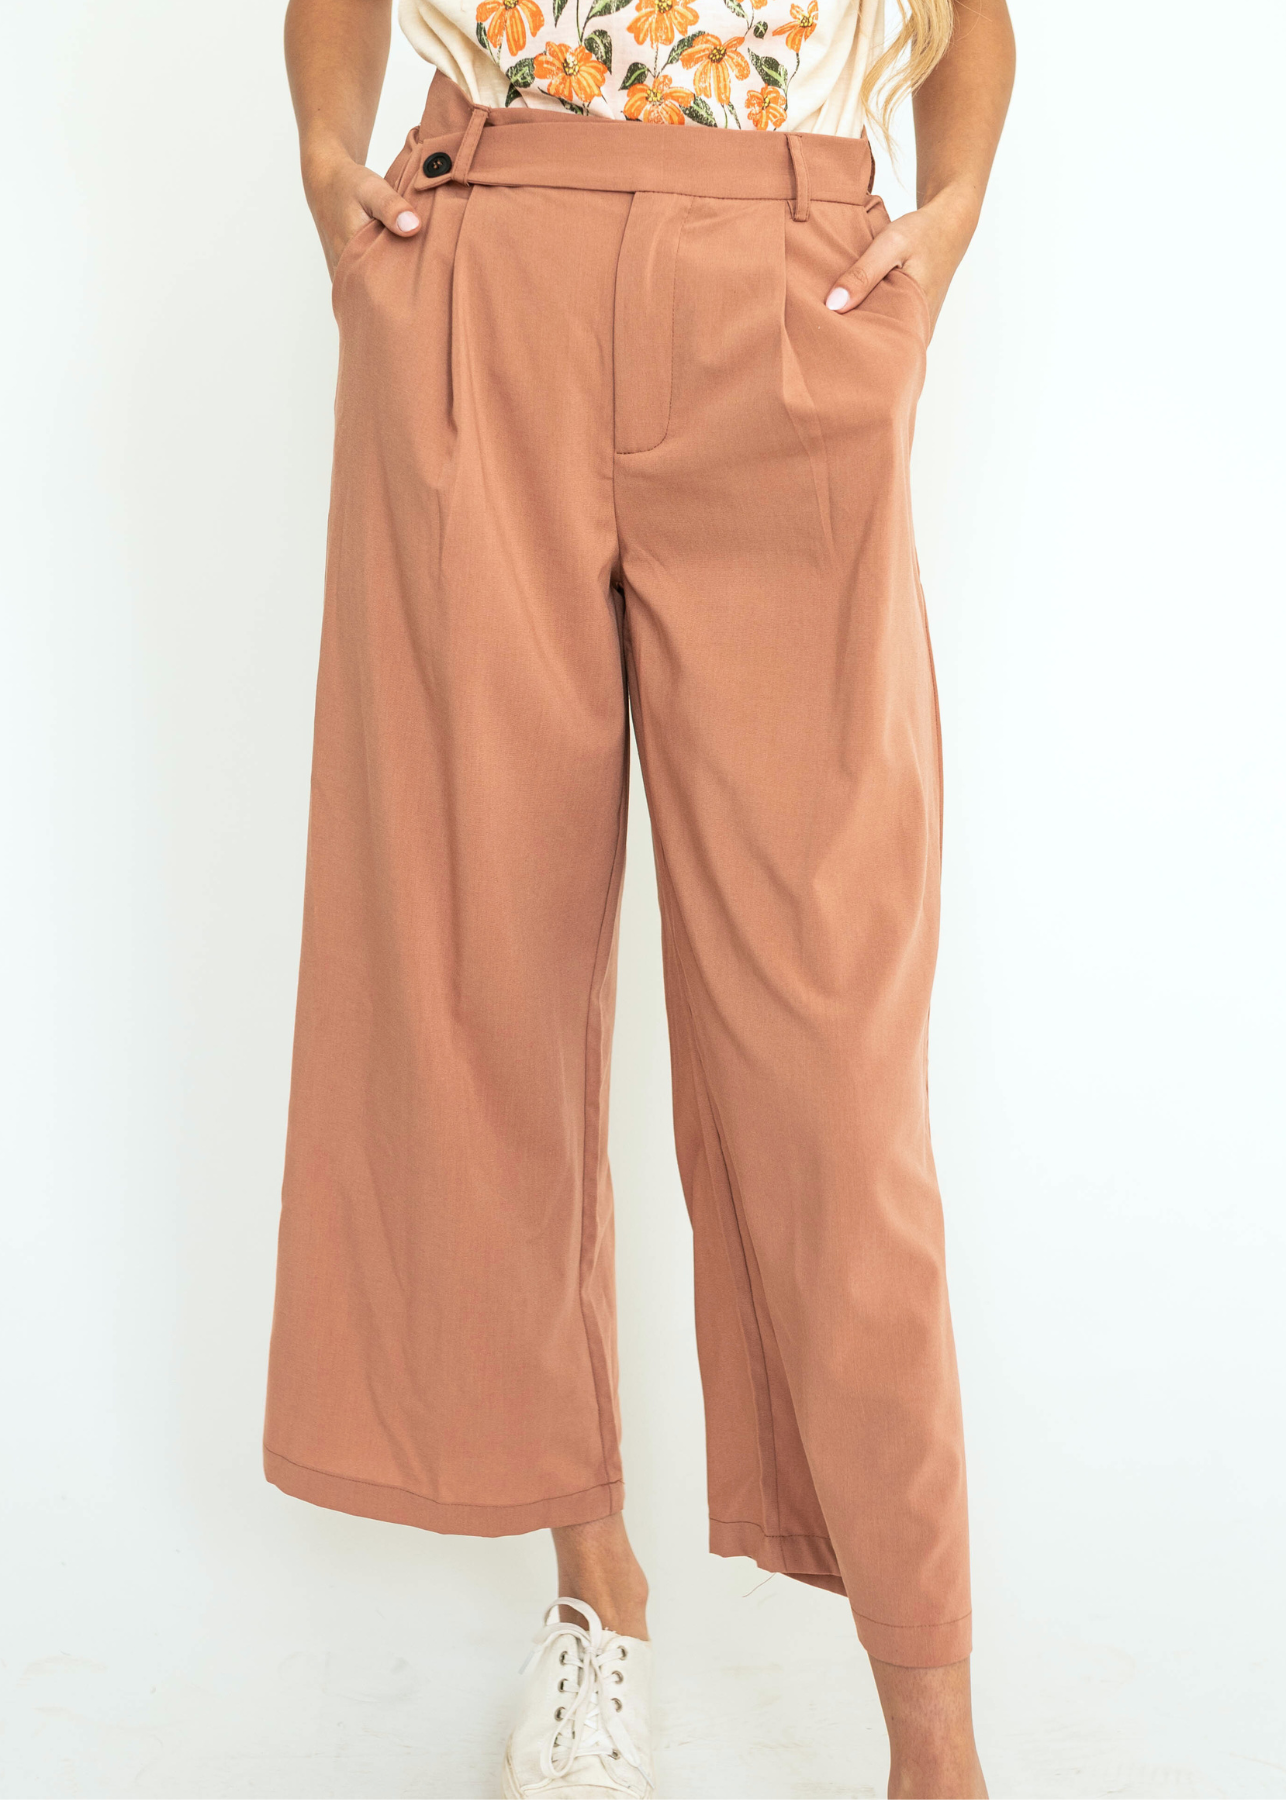 Caramel wide leg pleated pants with button at waist.